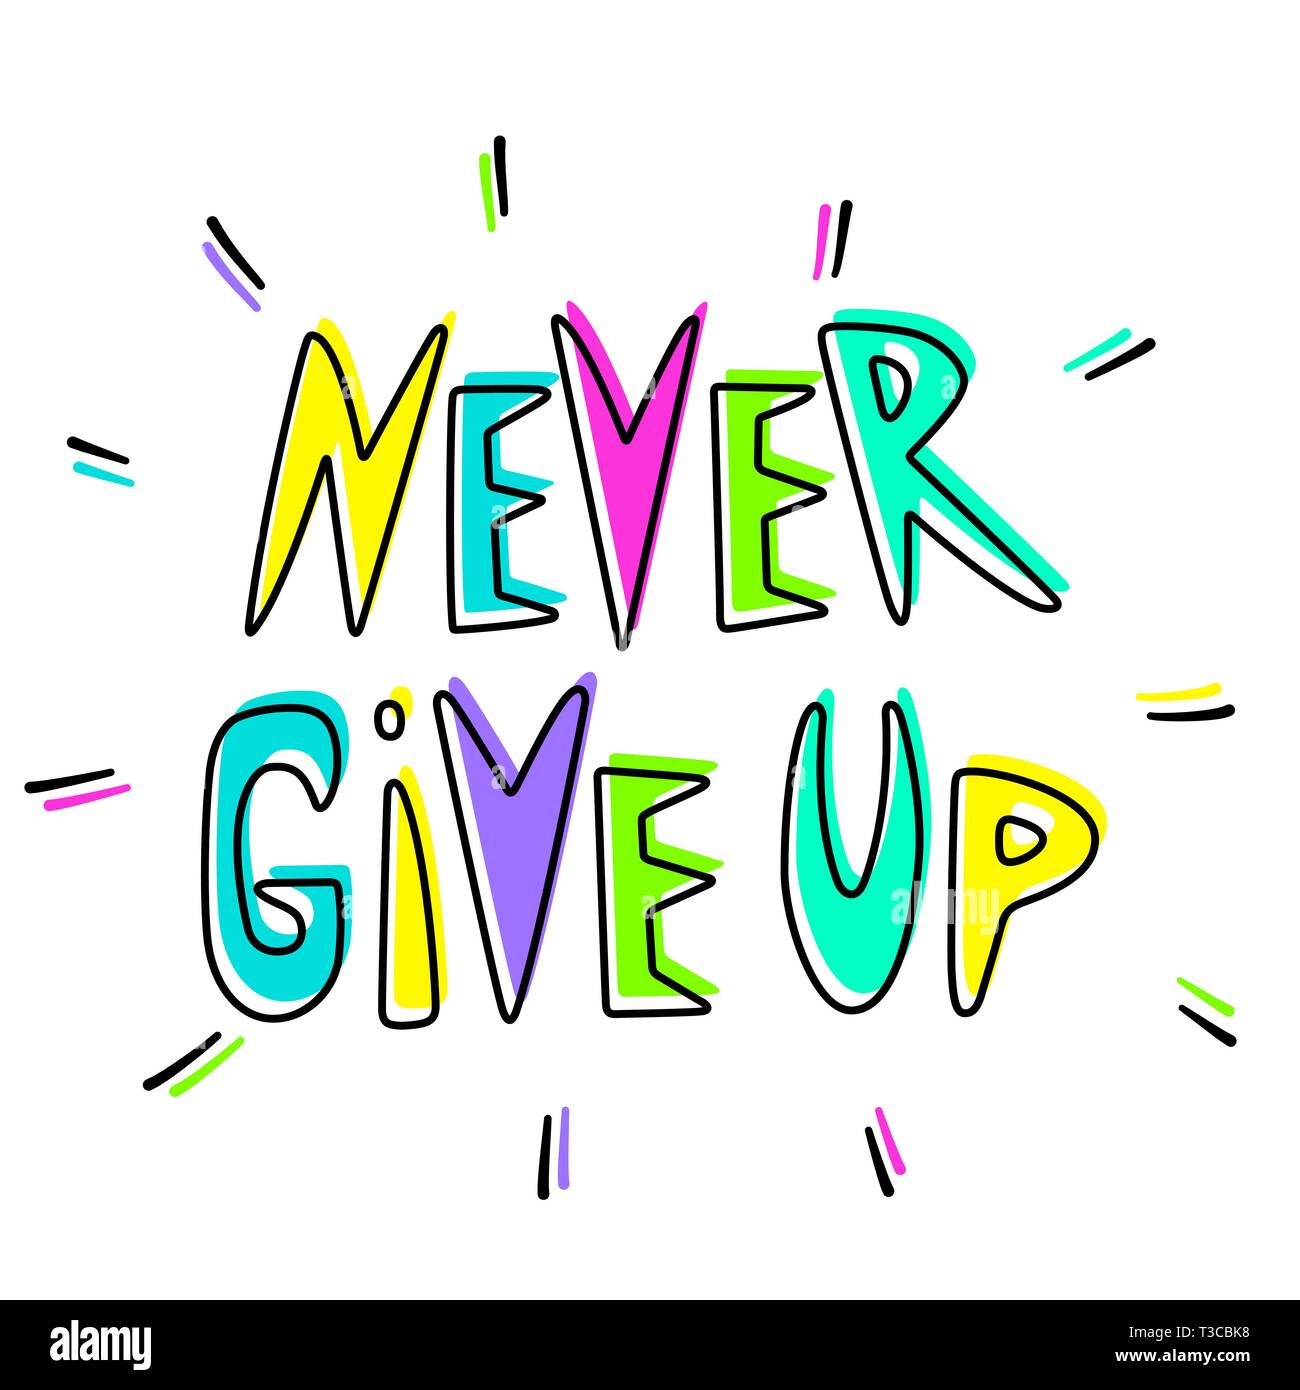 Never give up motivational and inspirational quote. Hand drawn ...